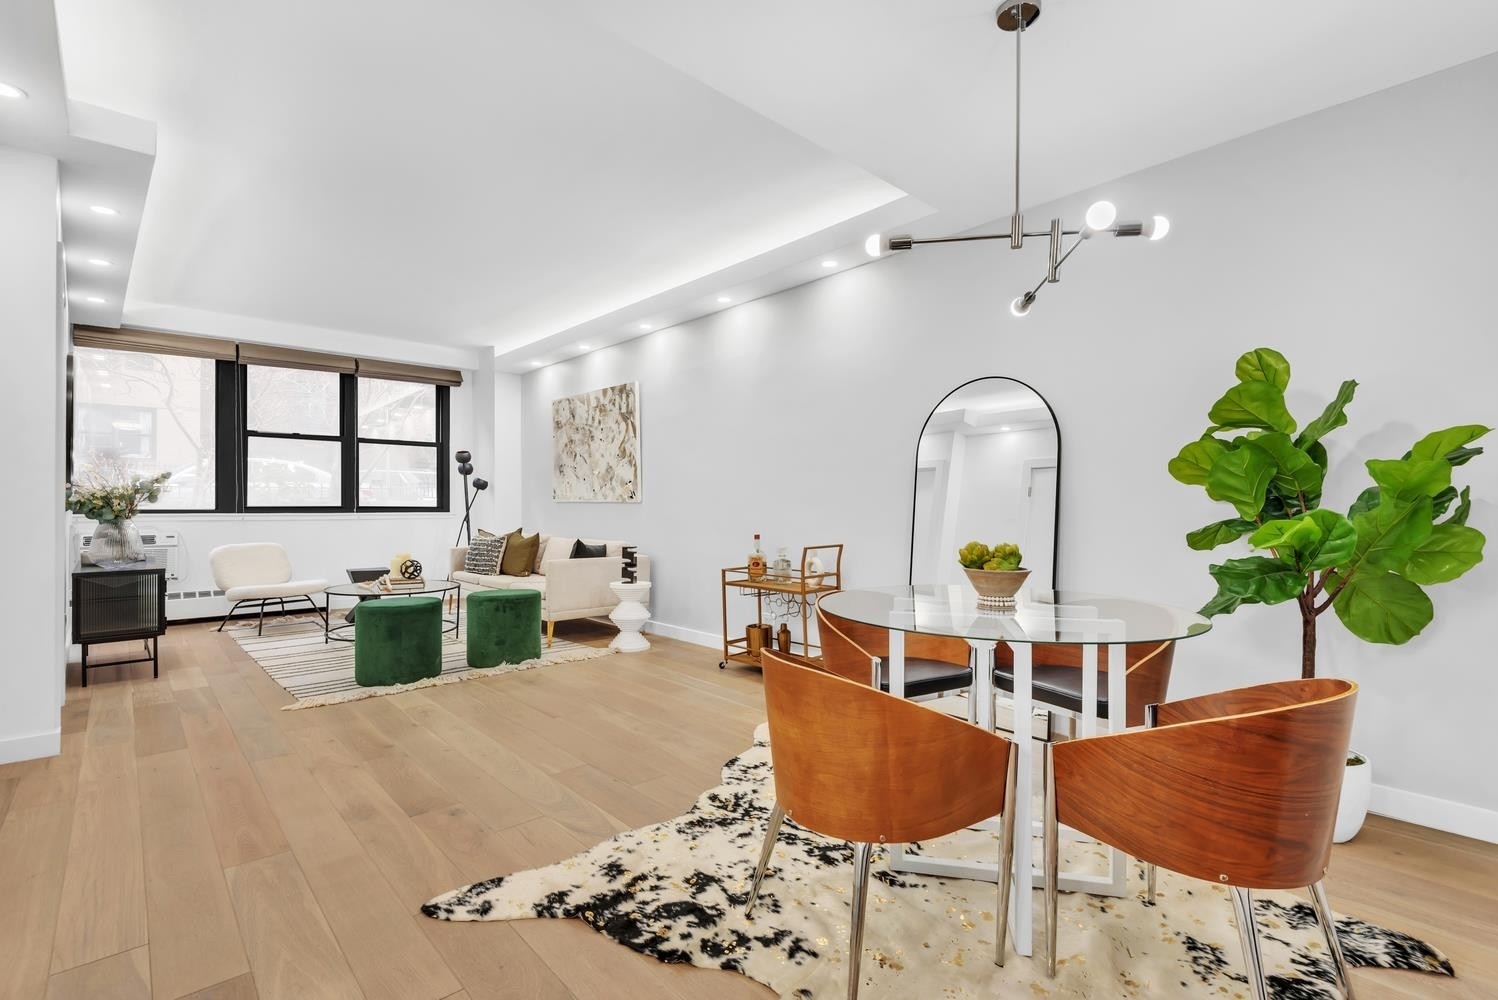 Property at Parc Fifteen, 210 E 15TH ST, 1N Gramercy Park, New York, New York 10003